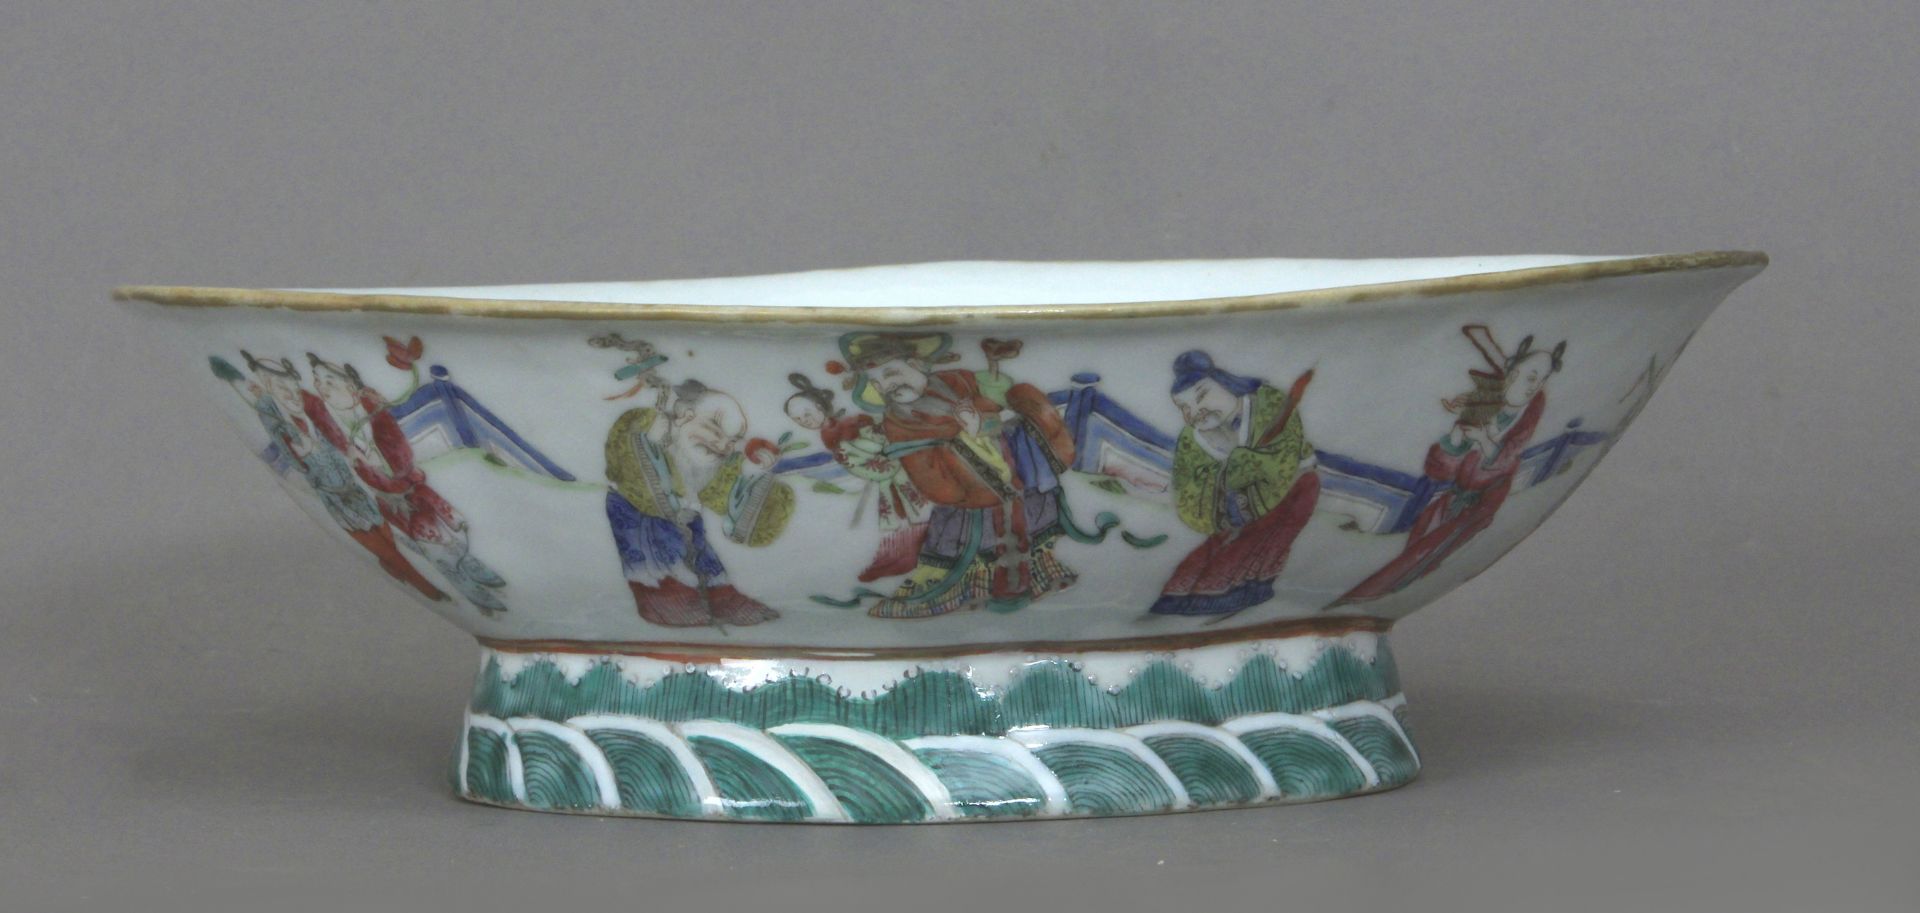 A 19th century Chinese tray from Qing period in Famille Rose porcelain